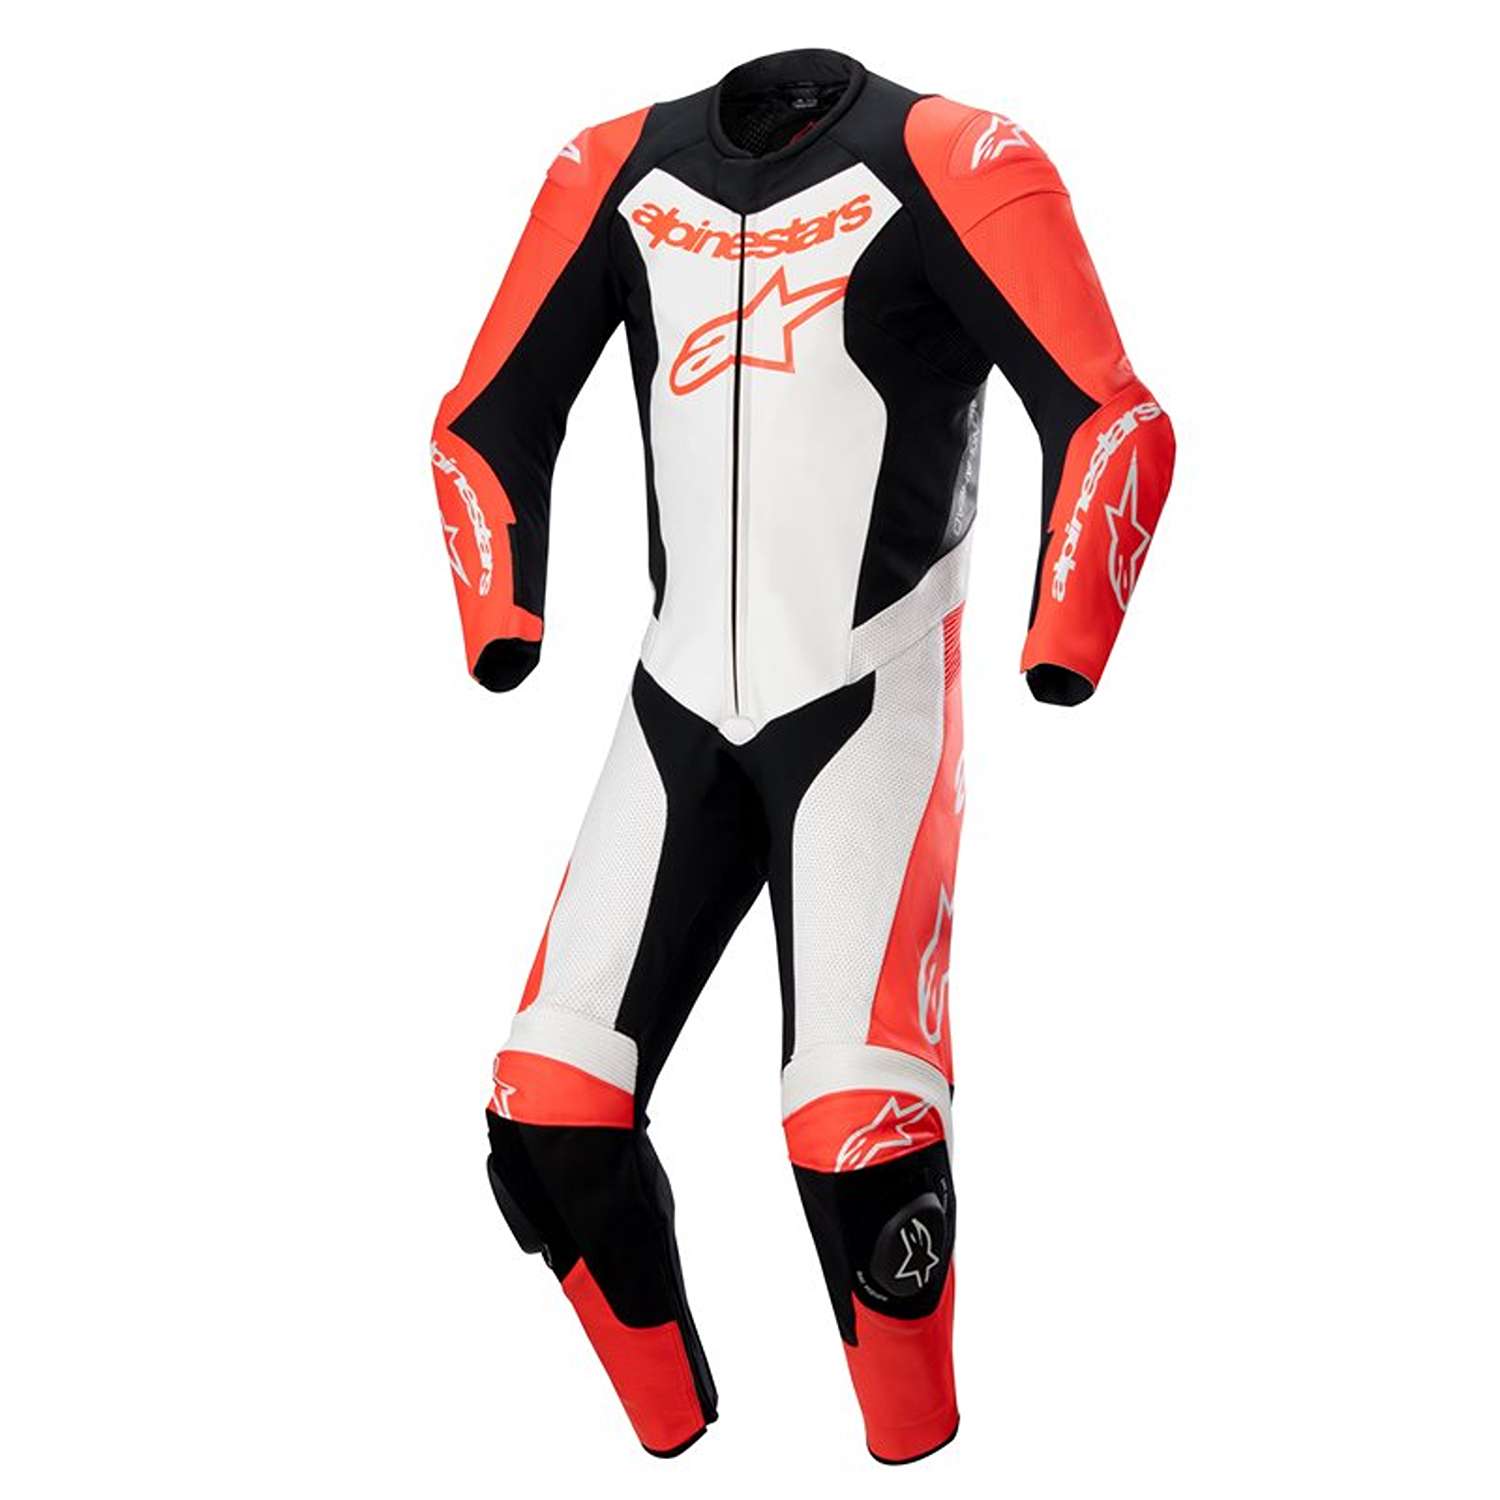 Image of Alpinestars Gp Force Lurv 1Pc Leather Suit Red Fluo White Black Size 48 ID 8059347340364